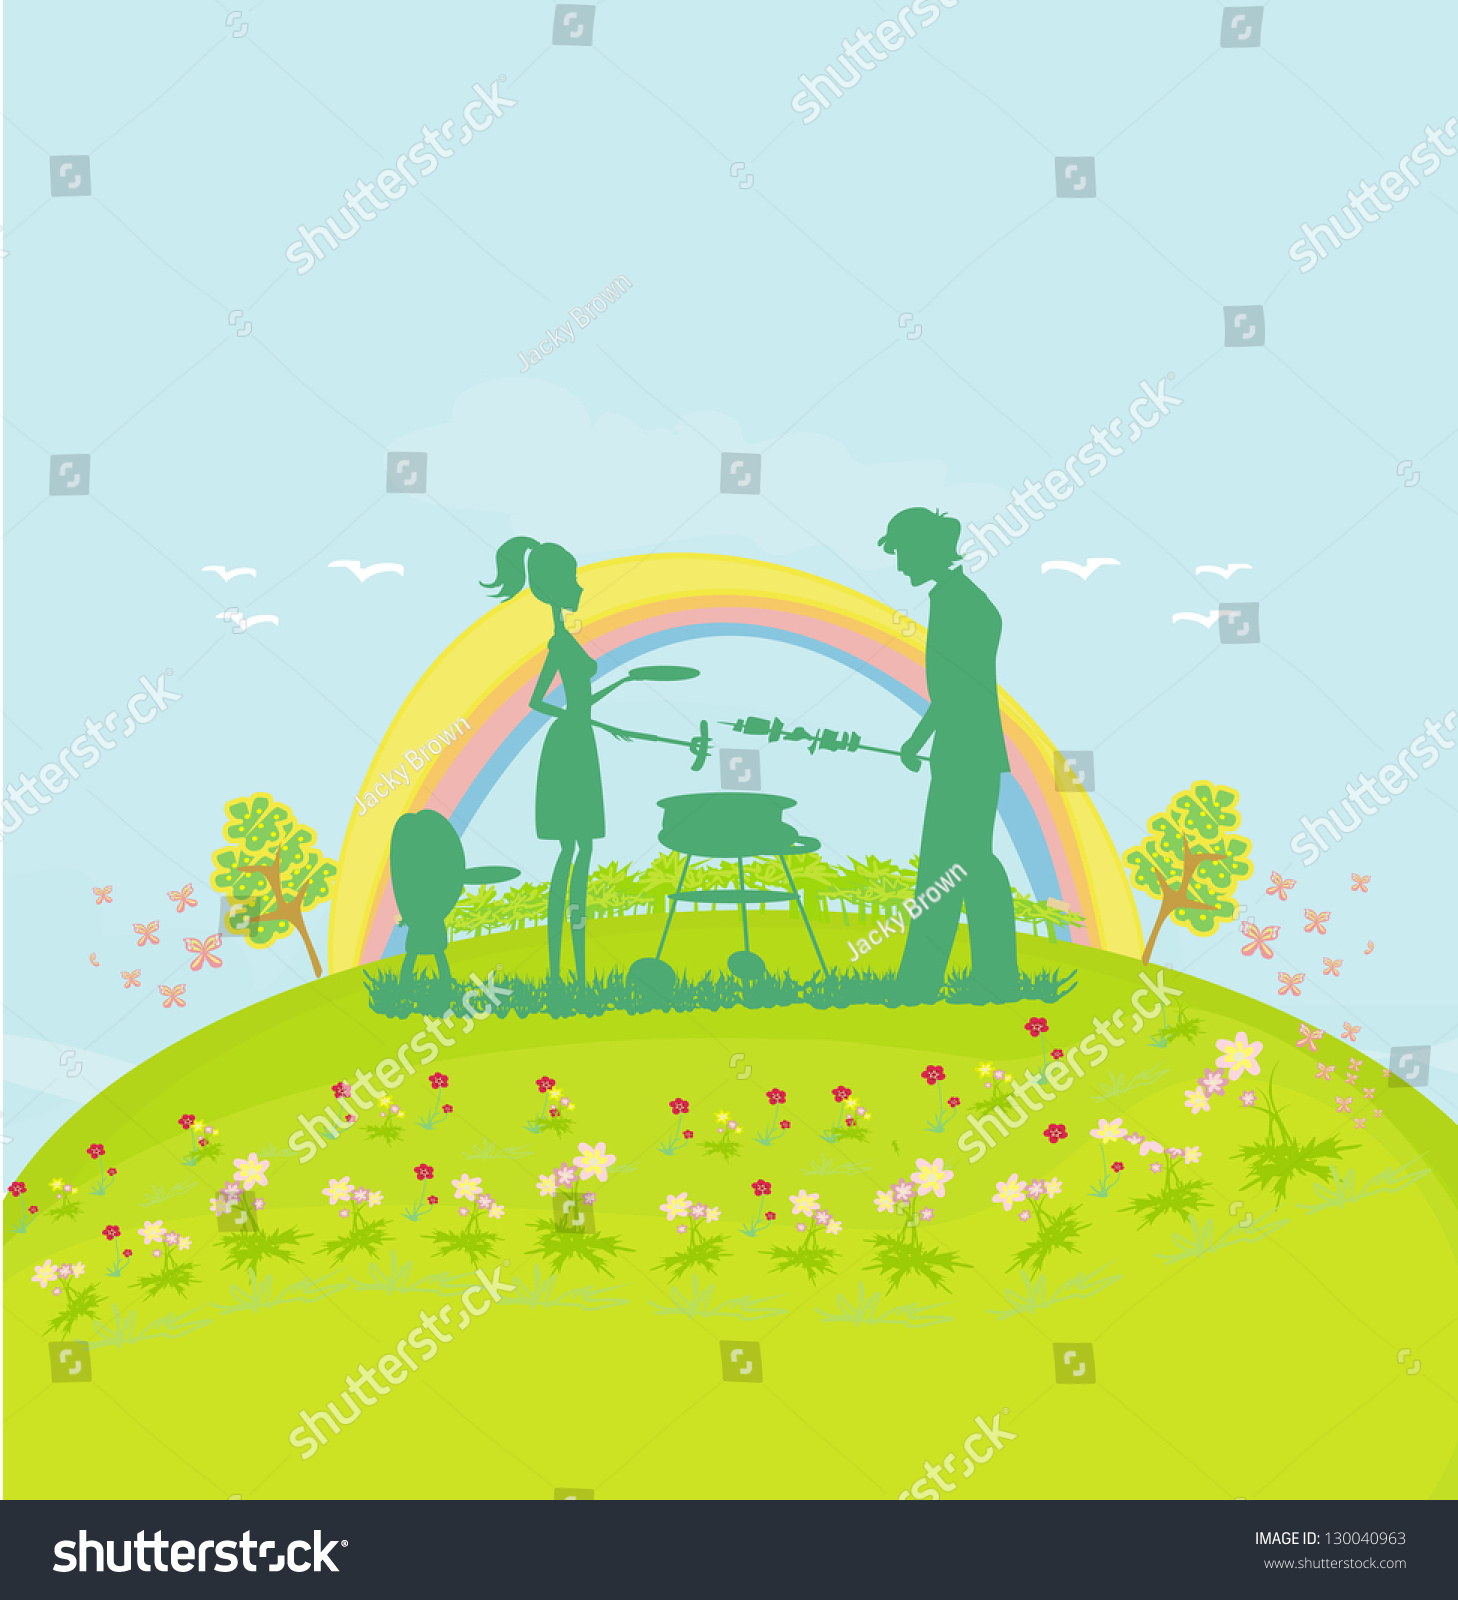 A Vector Illustration Of A Family Having A Picnic In A Park - 130040963